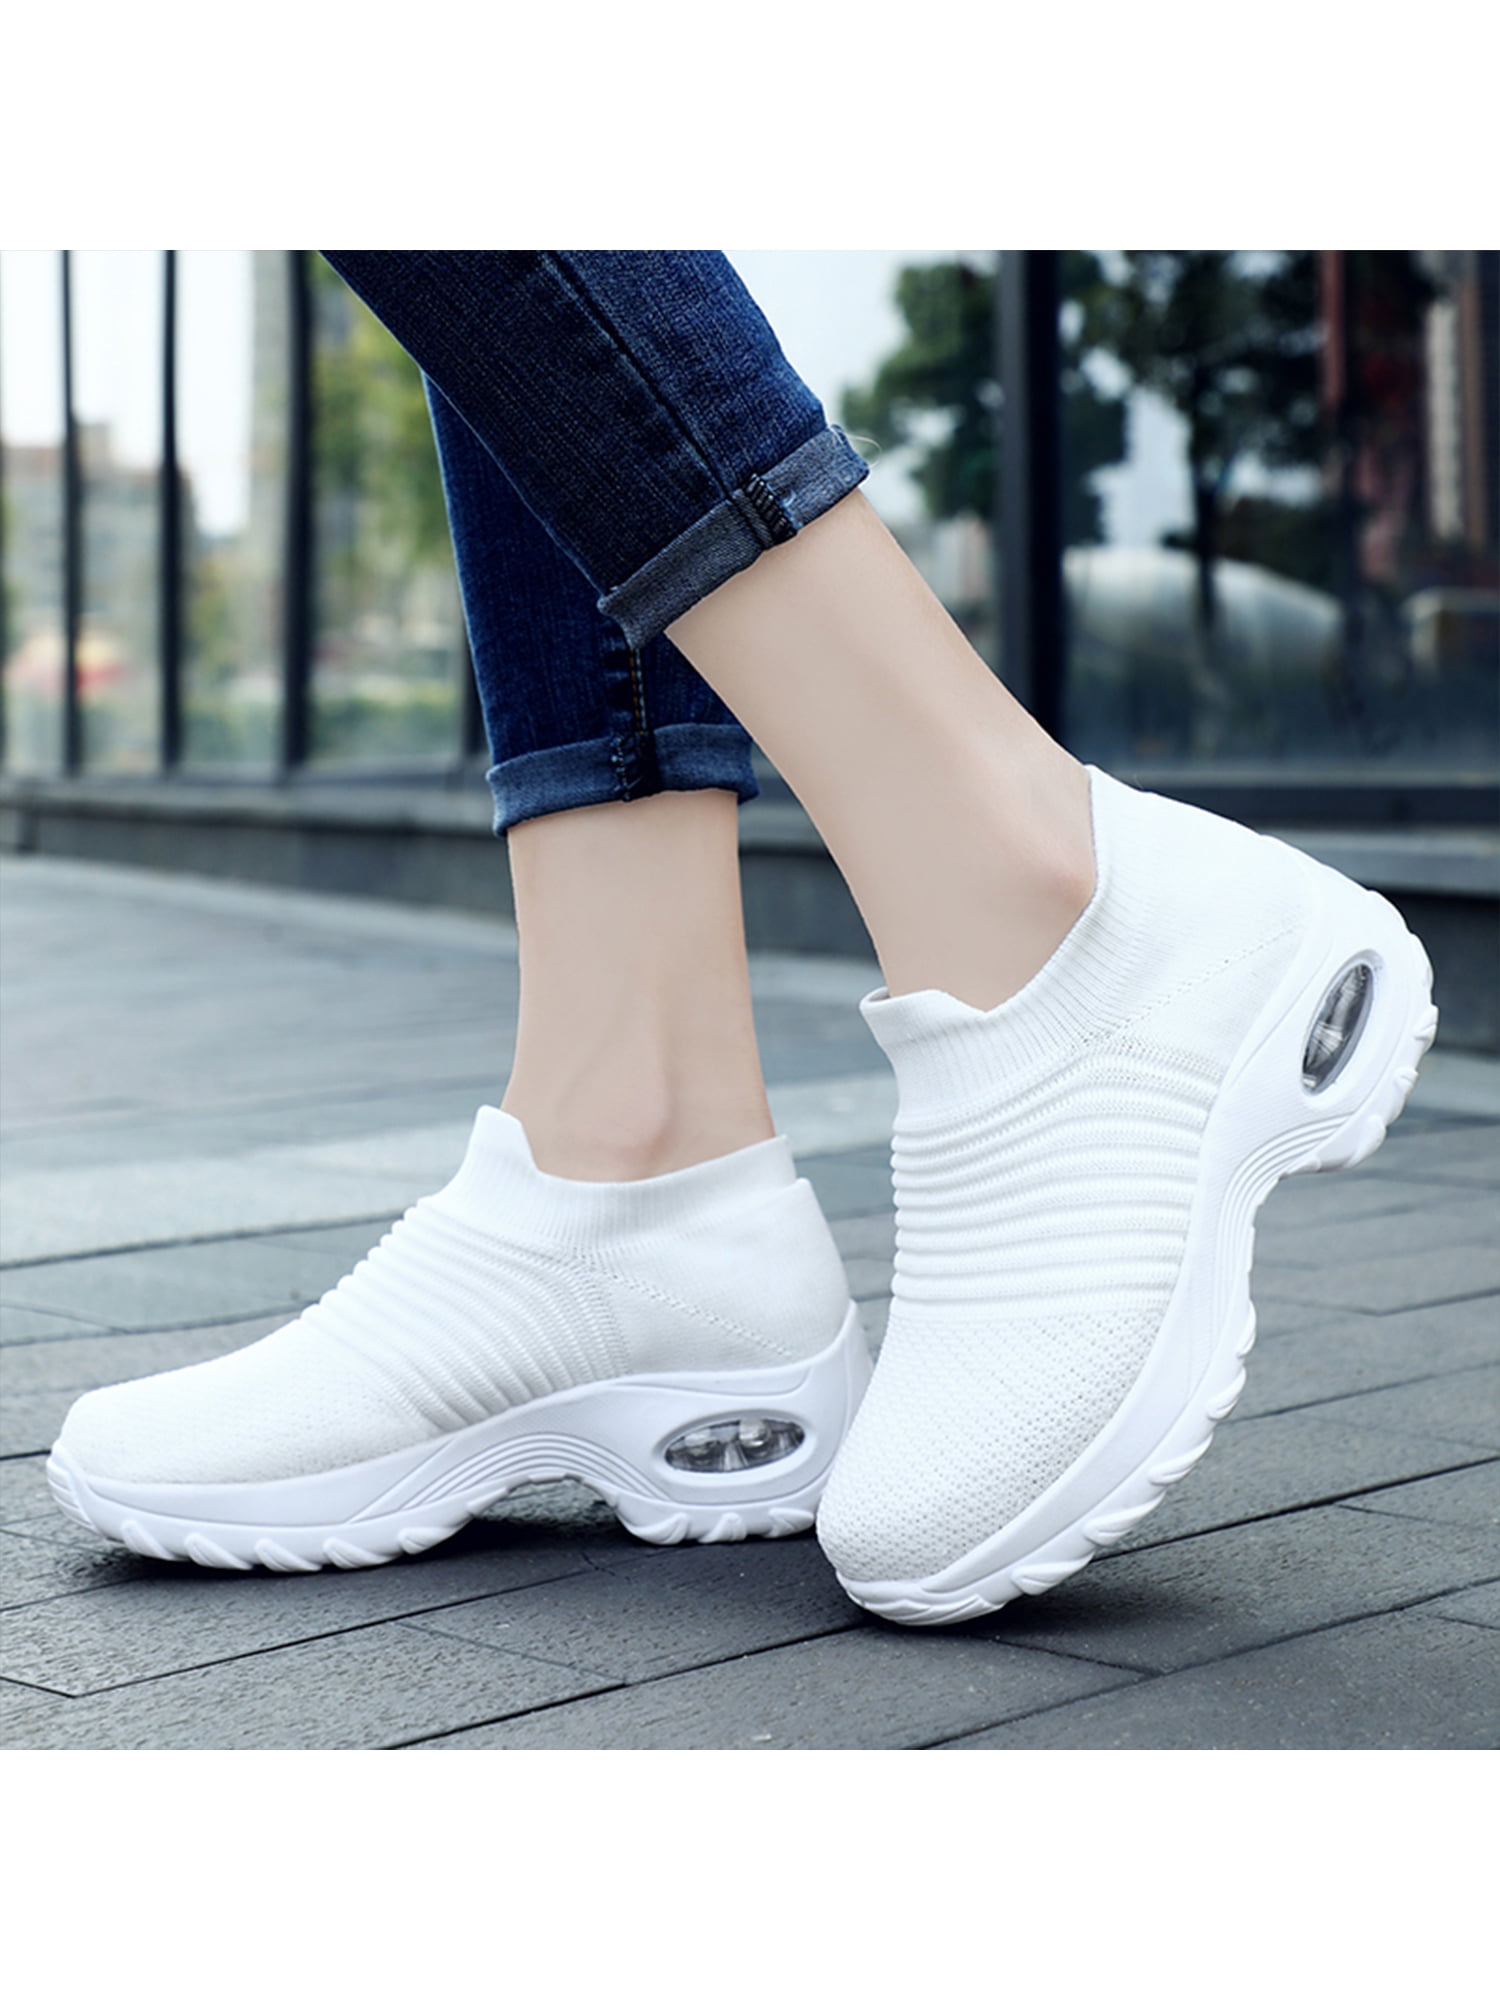 Fashion Womens Sneakers Walking Running Athletic Sports Jogging Casual Shoes 